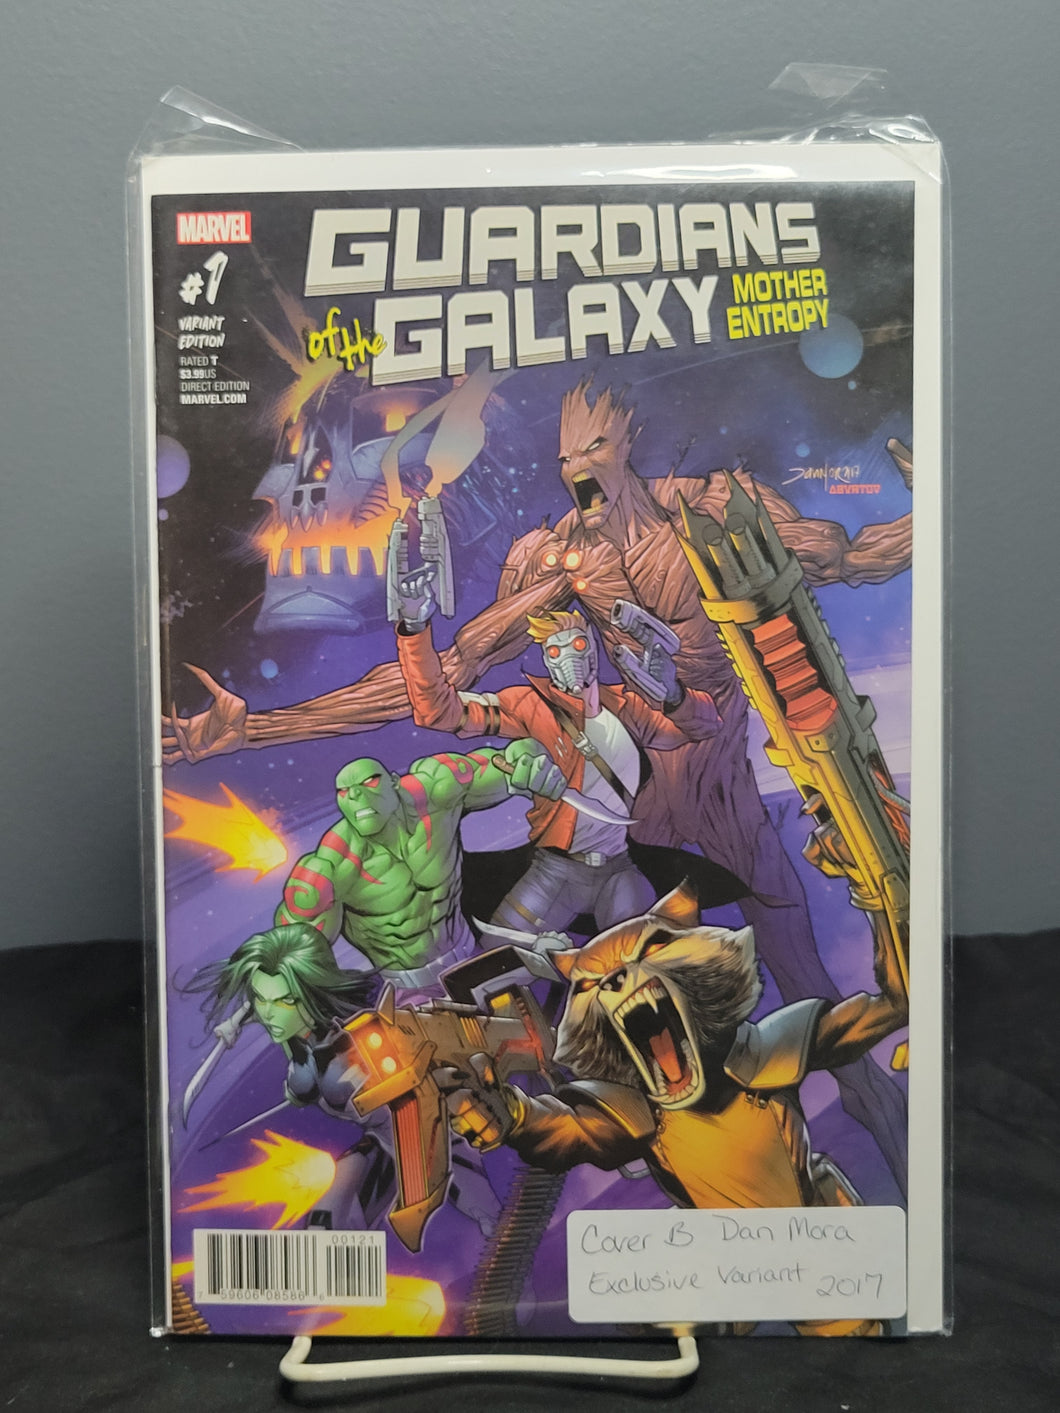 Guardians Of The Galaxy Mother Entropy #1 1:25 Variant